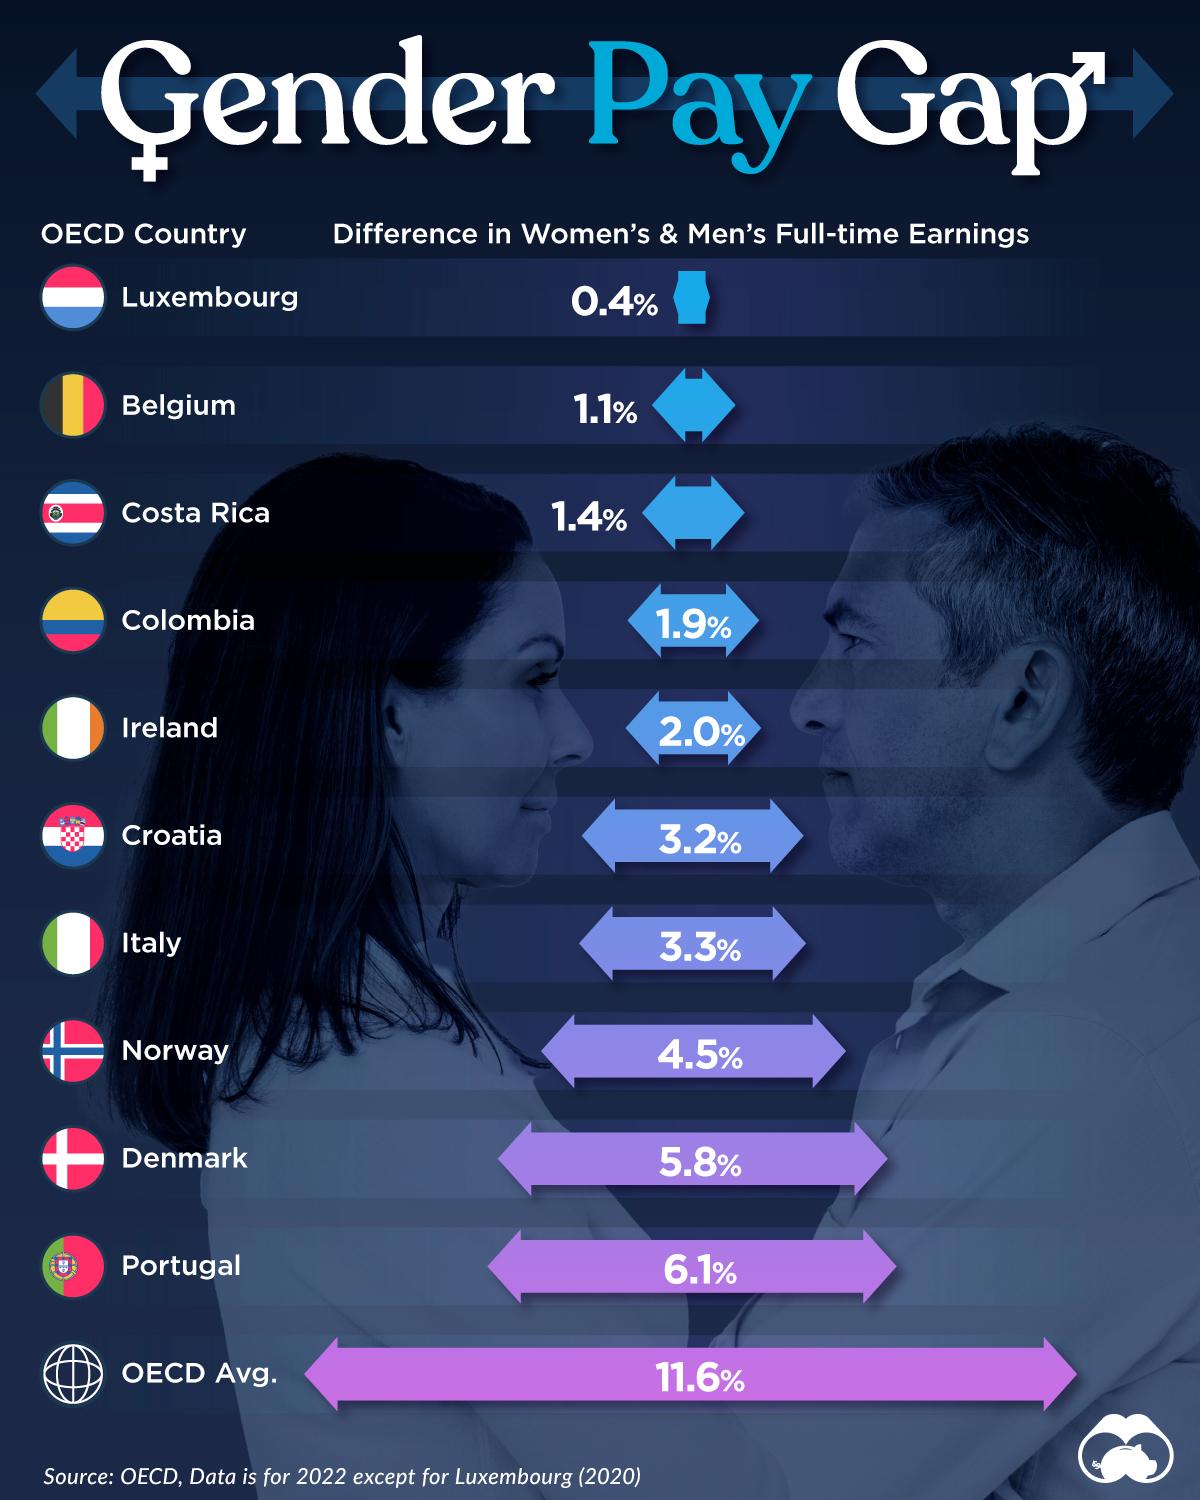 The Smallest Gender Pay Gaps in OECD Countries